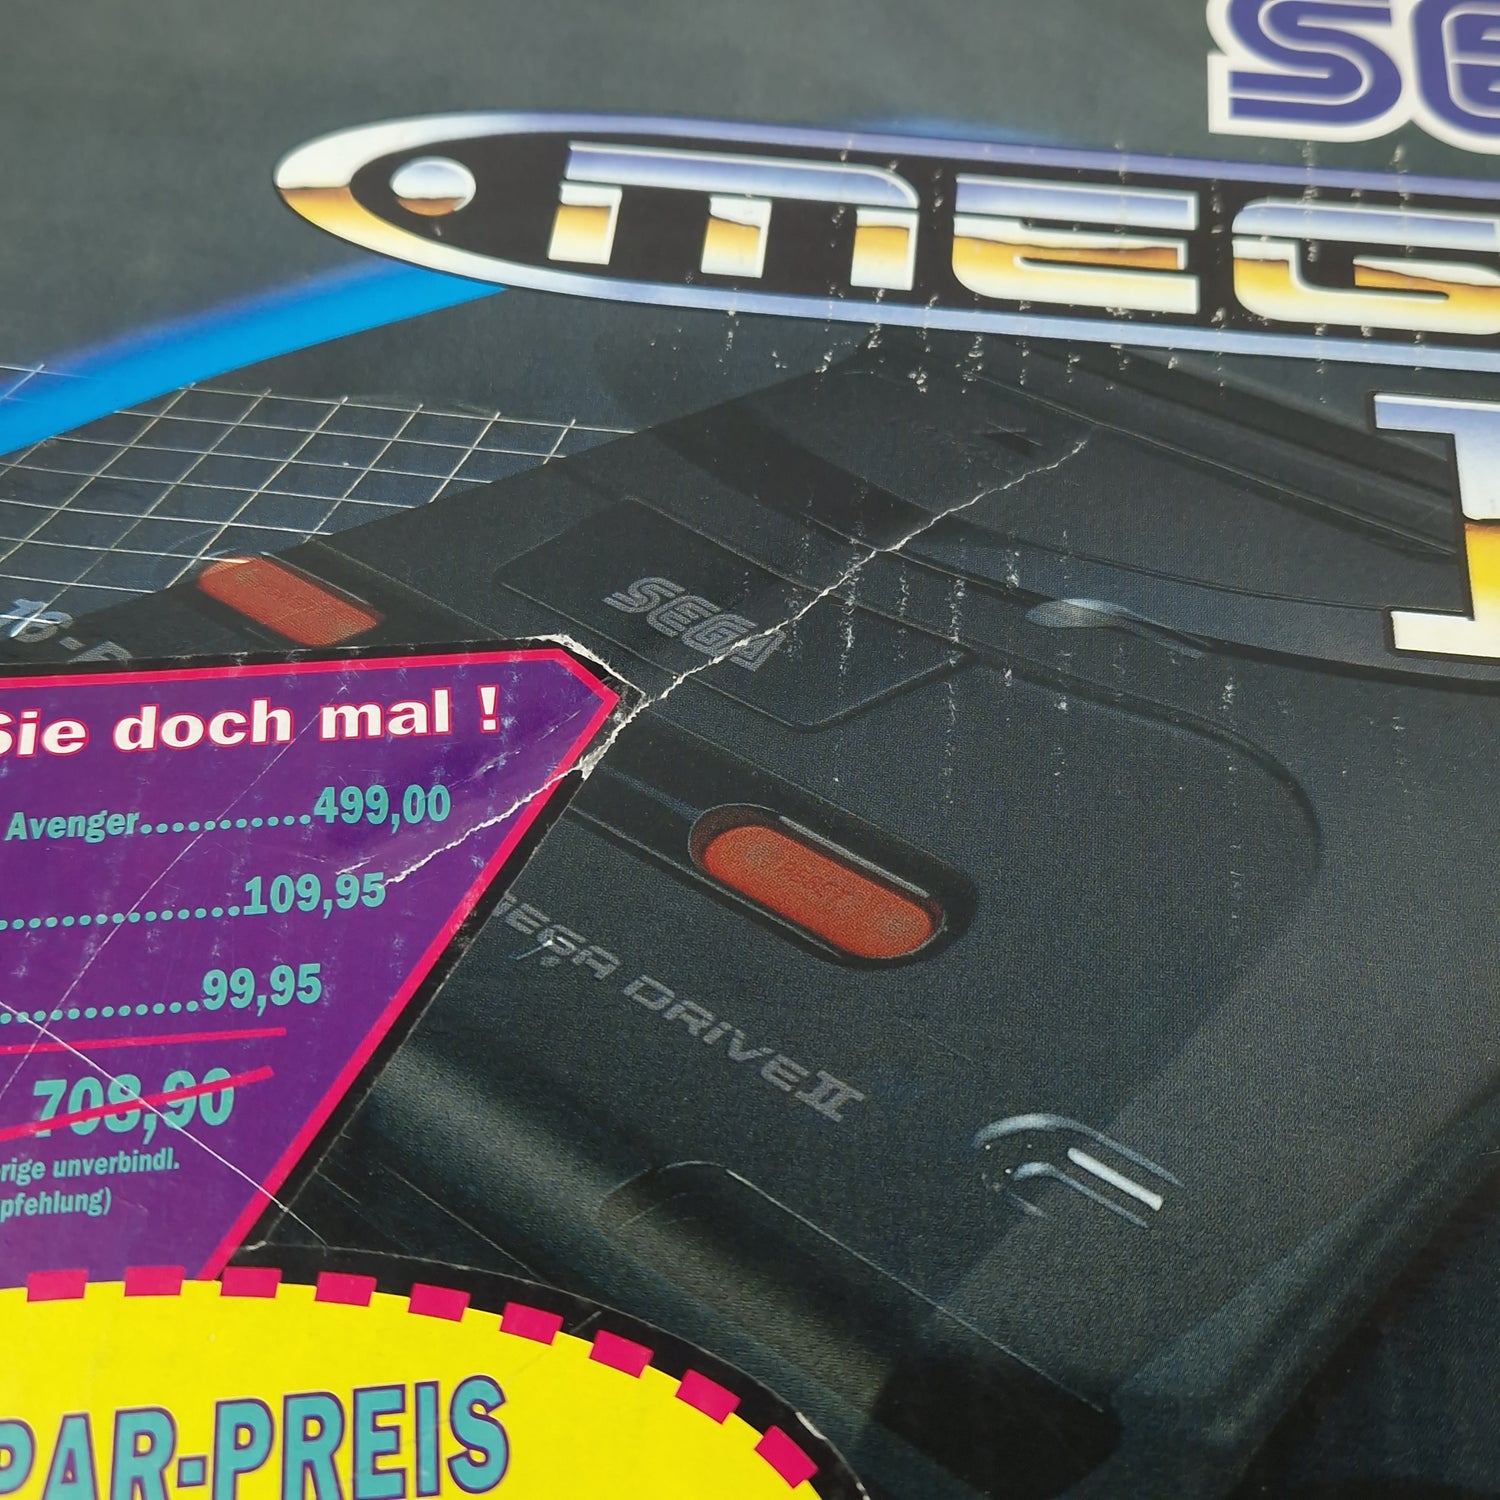 Sega Mega-CD II console in original packaging - PAL console MCD + Road Avenger / WITHOUT INLAY